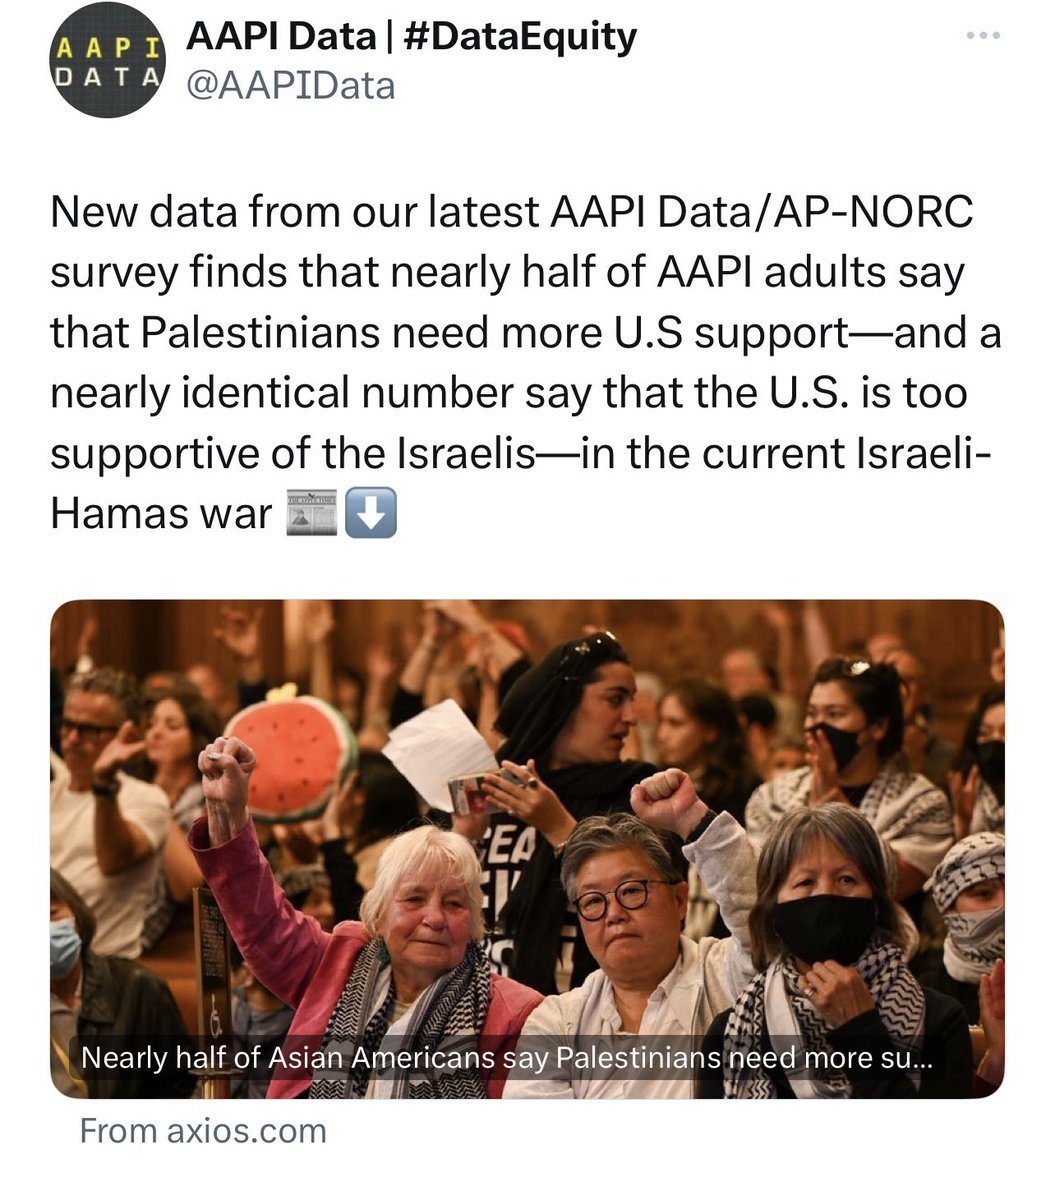 New data on views of AAPI on US support for Palestine and Israel by @ProfJanelleWong